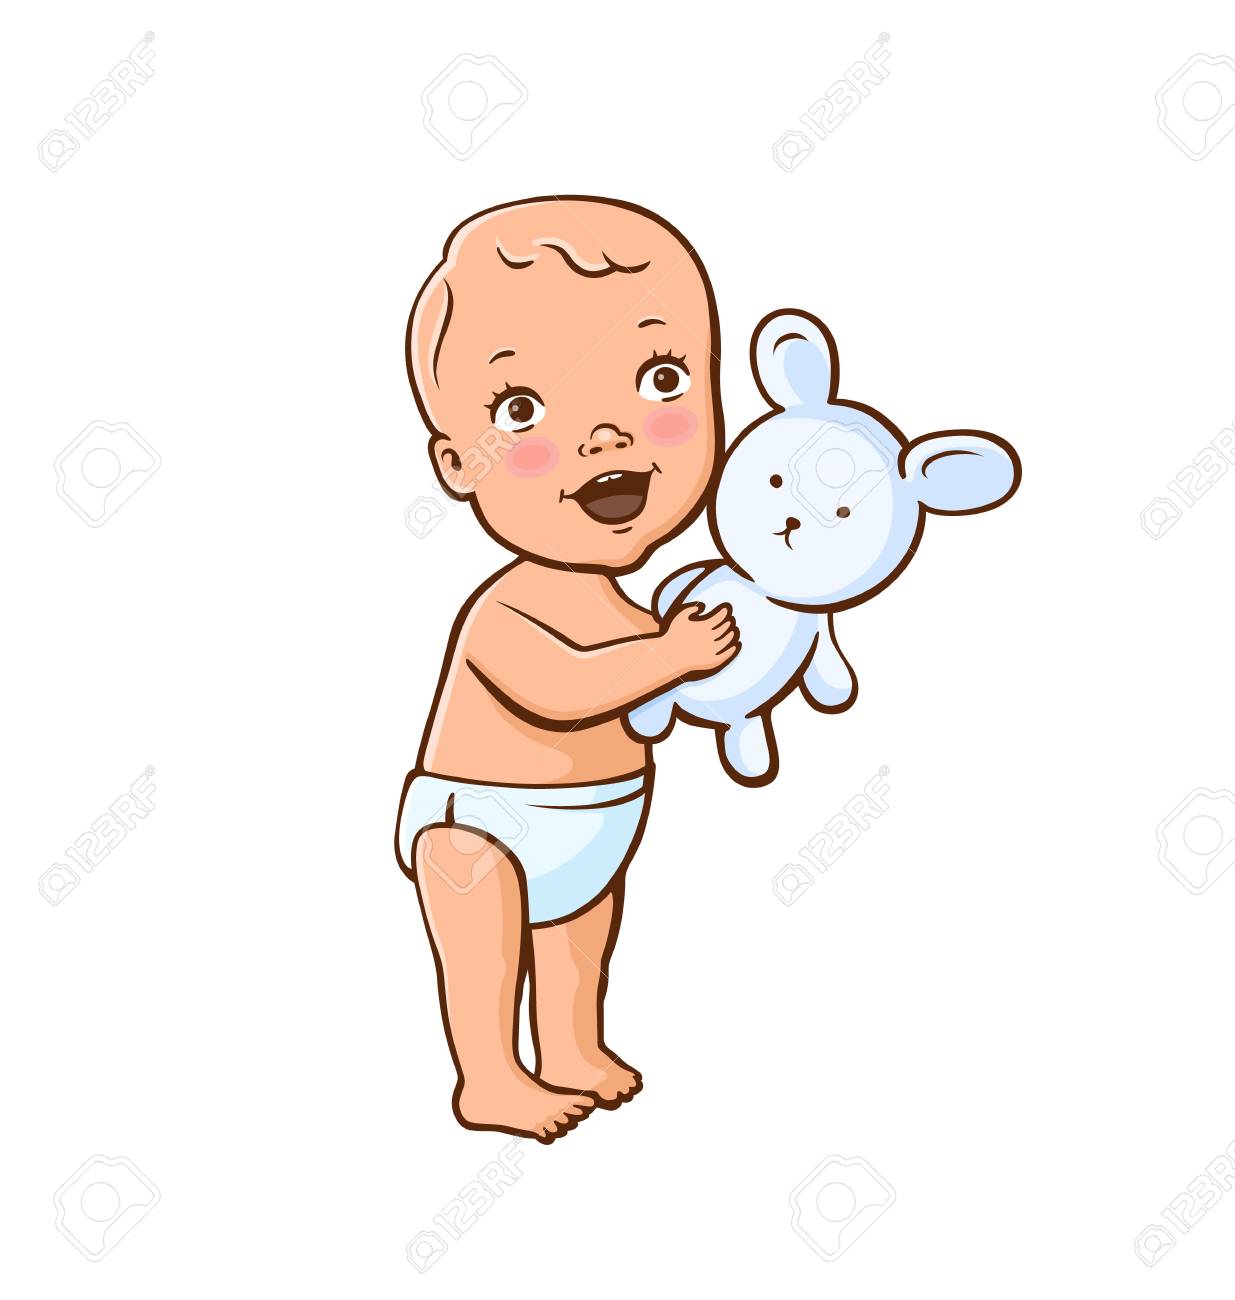 71881 Baby free clipart.